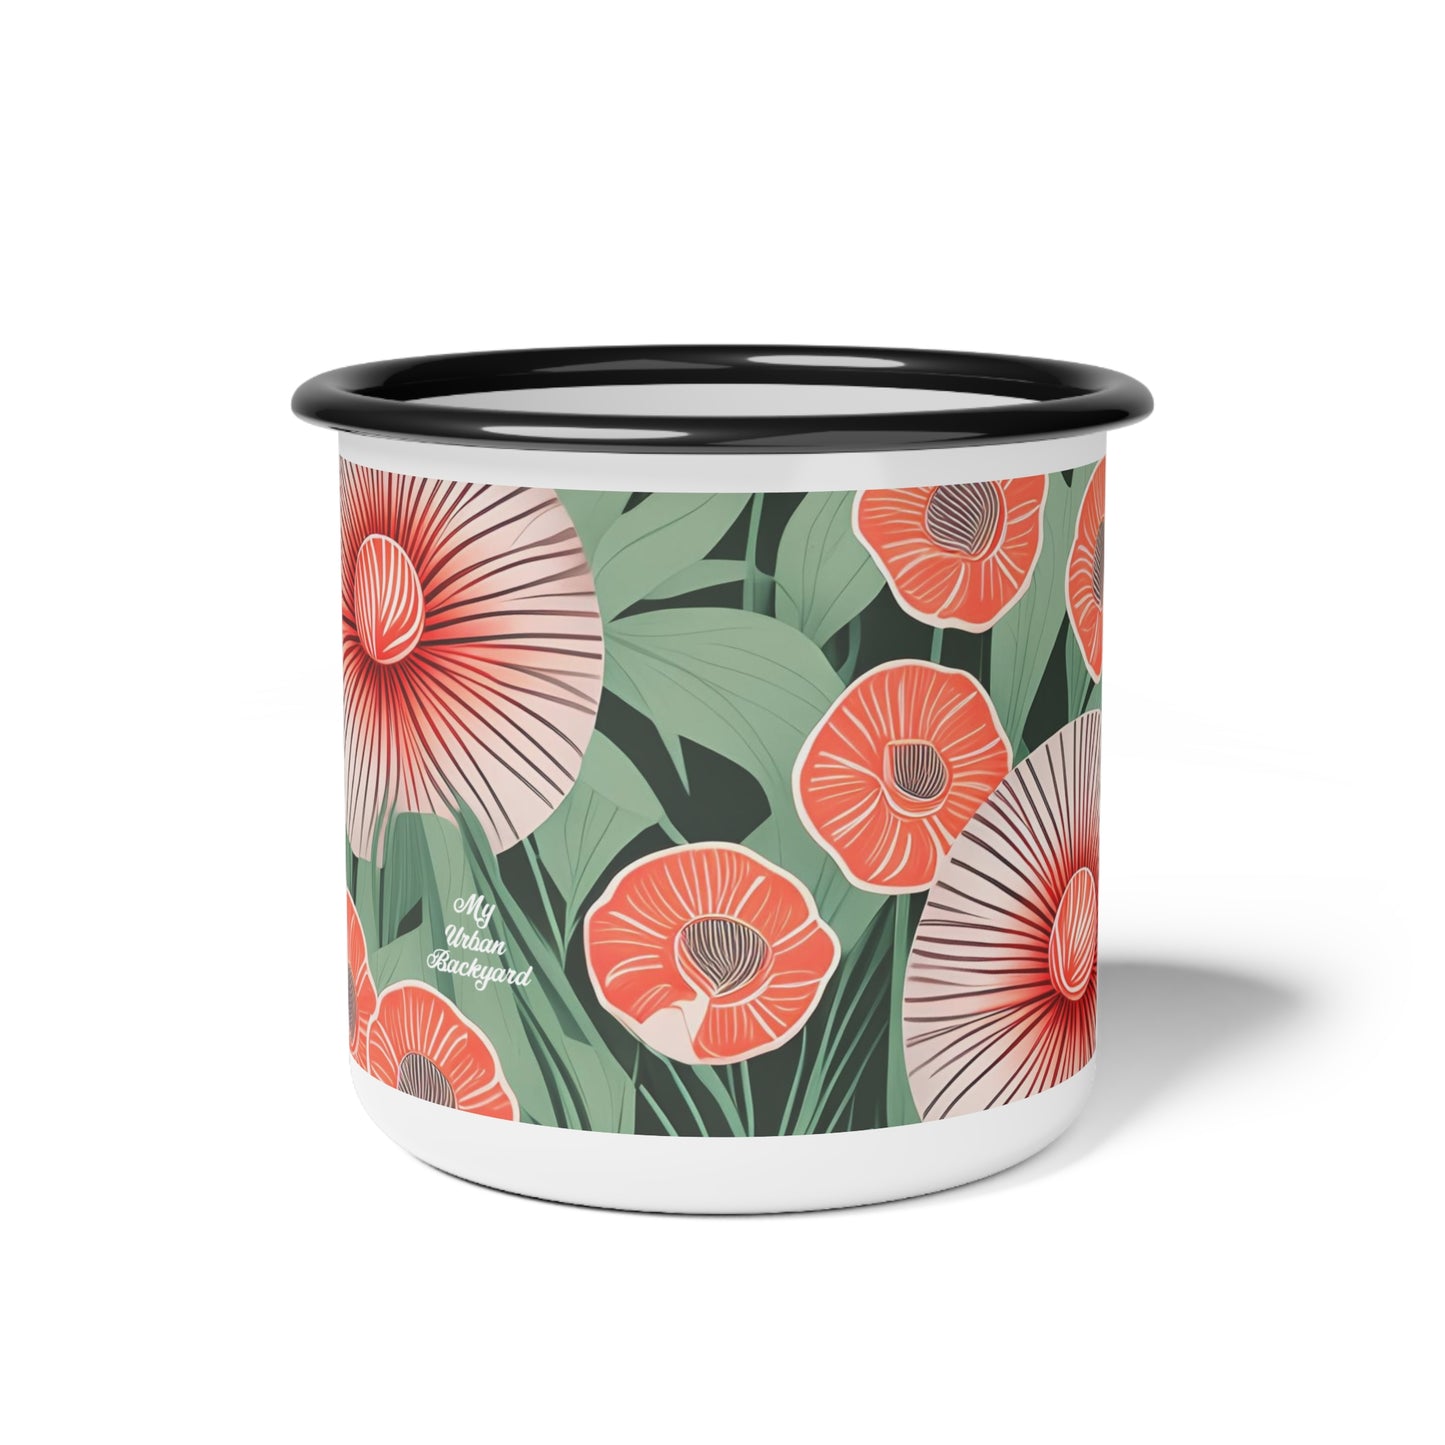 Red Art Deco Flowers, Enamel Camping Mug for Coffee, Tea, Cocoa, or Cereal - 12oz